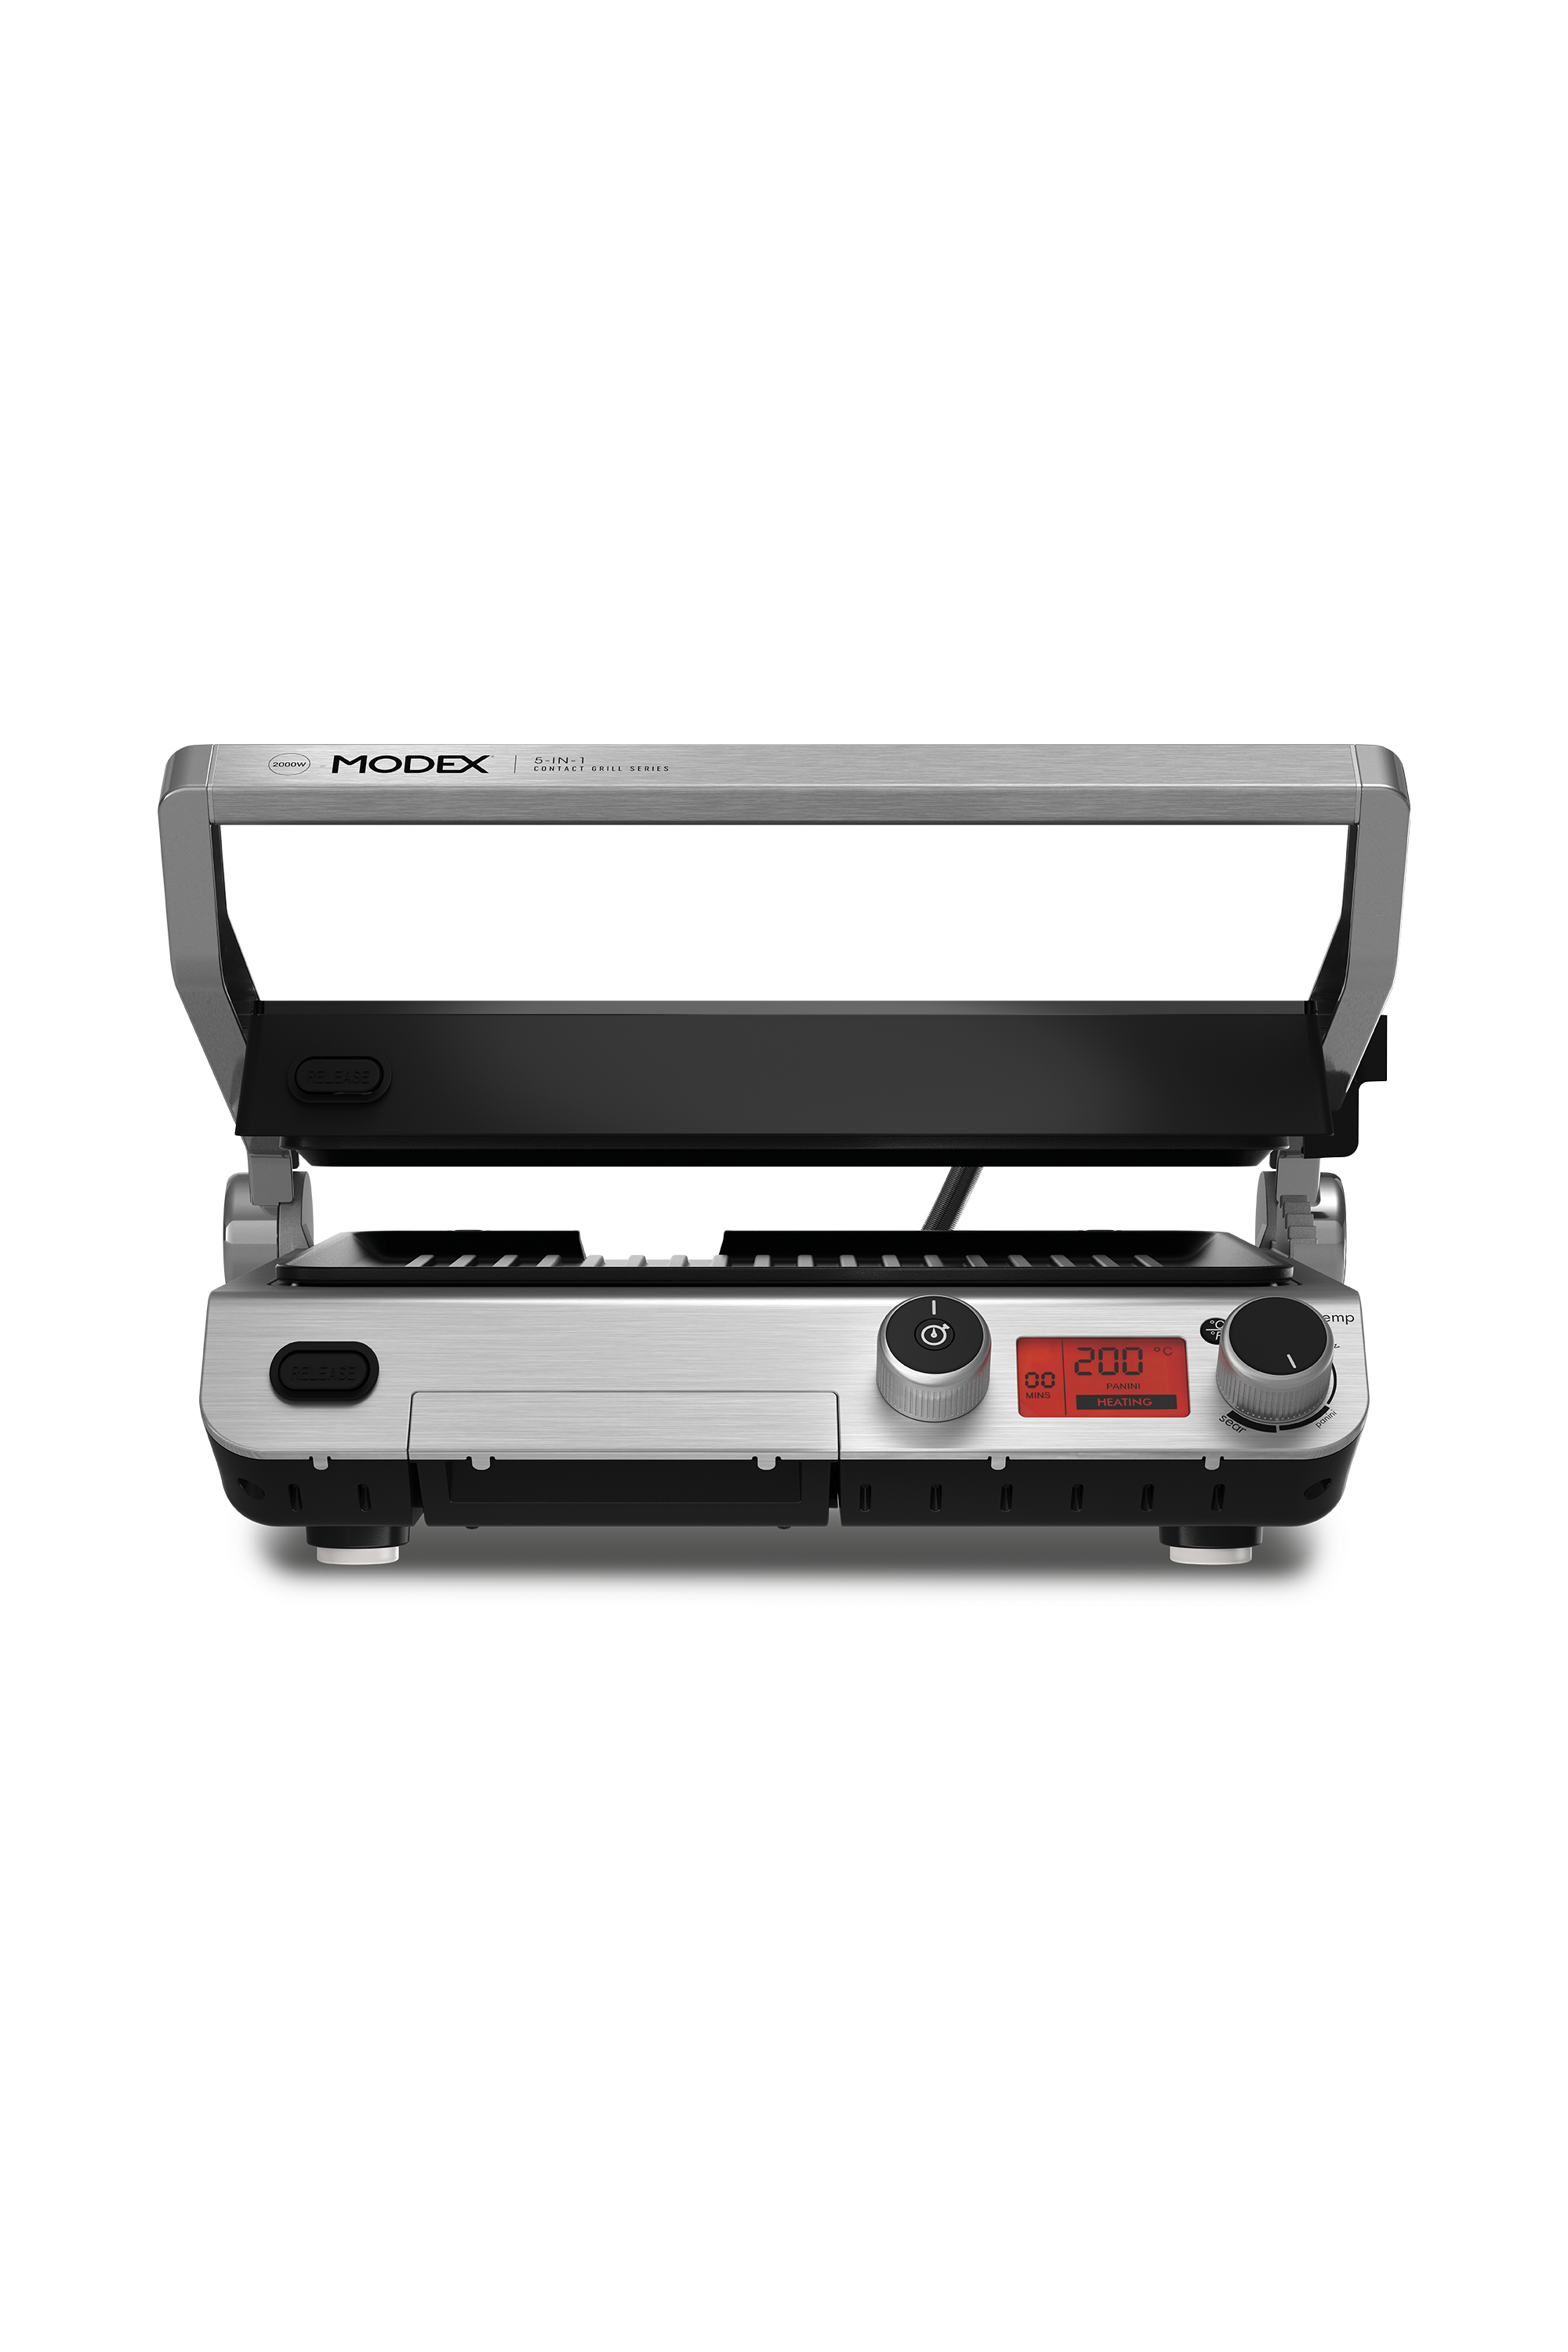 Cg910 Contact Grill